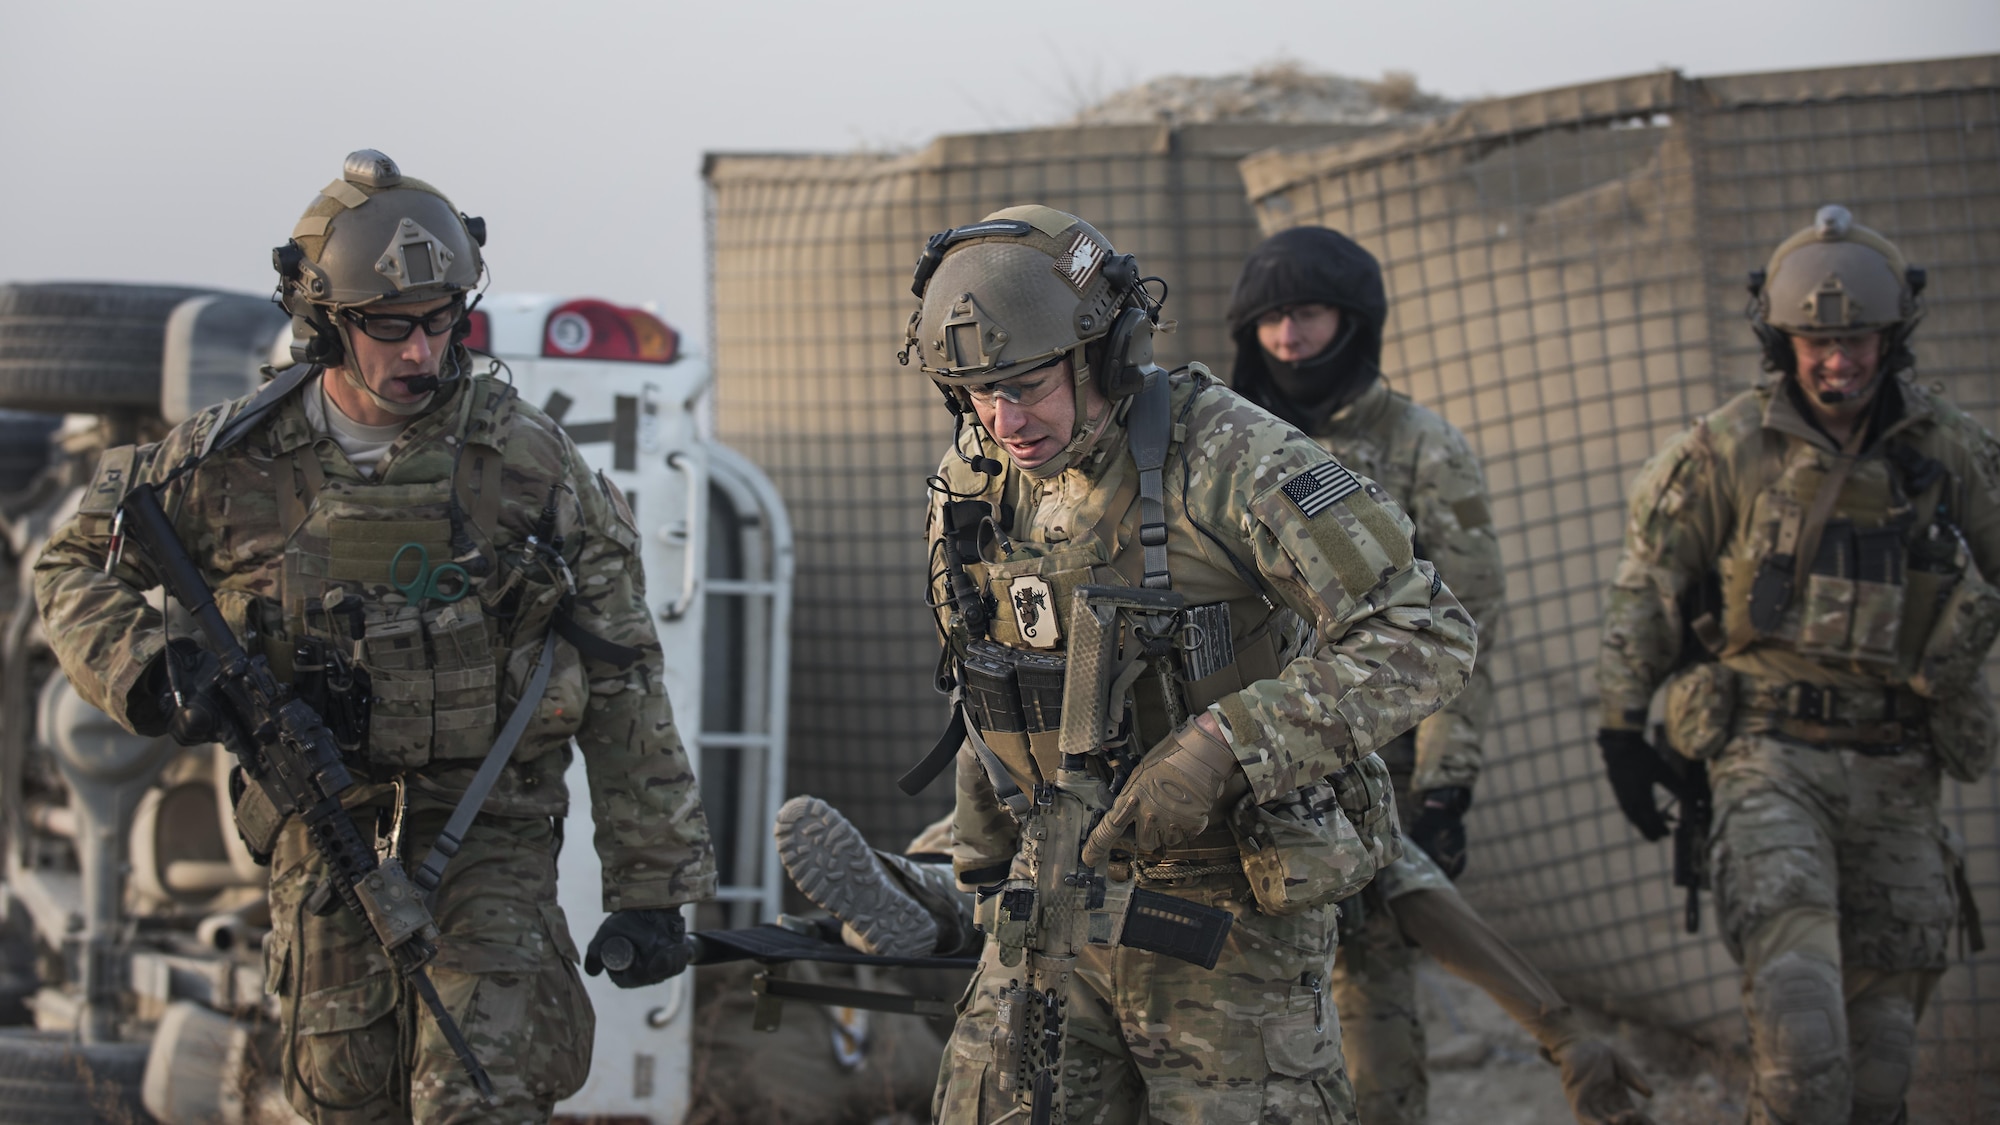 “Guardian Angels” of the 83rd Expeditionary Rescue Squadron carry a patient by litter for evacuation during a mass casualty exercise held Nov. 17, 2016 at Bagram Airfield, Afghanistan. Training scenarios are based on real-world situations that have been encountered in past operations. (U.S. Air Force photo by Staff Sgt. Katherine Spessa)